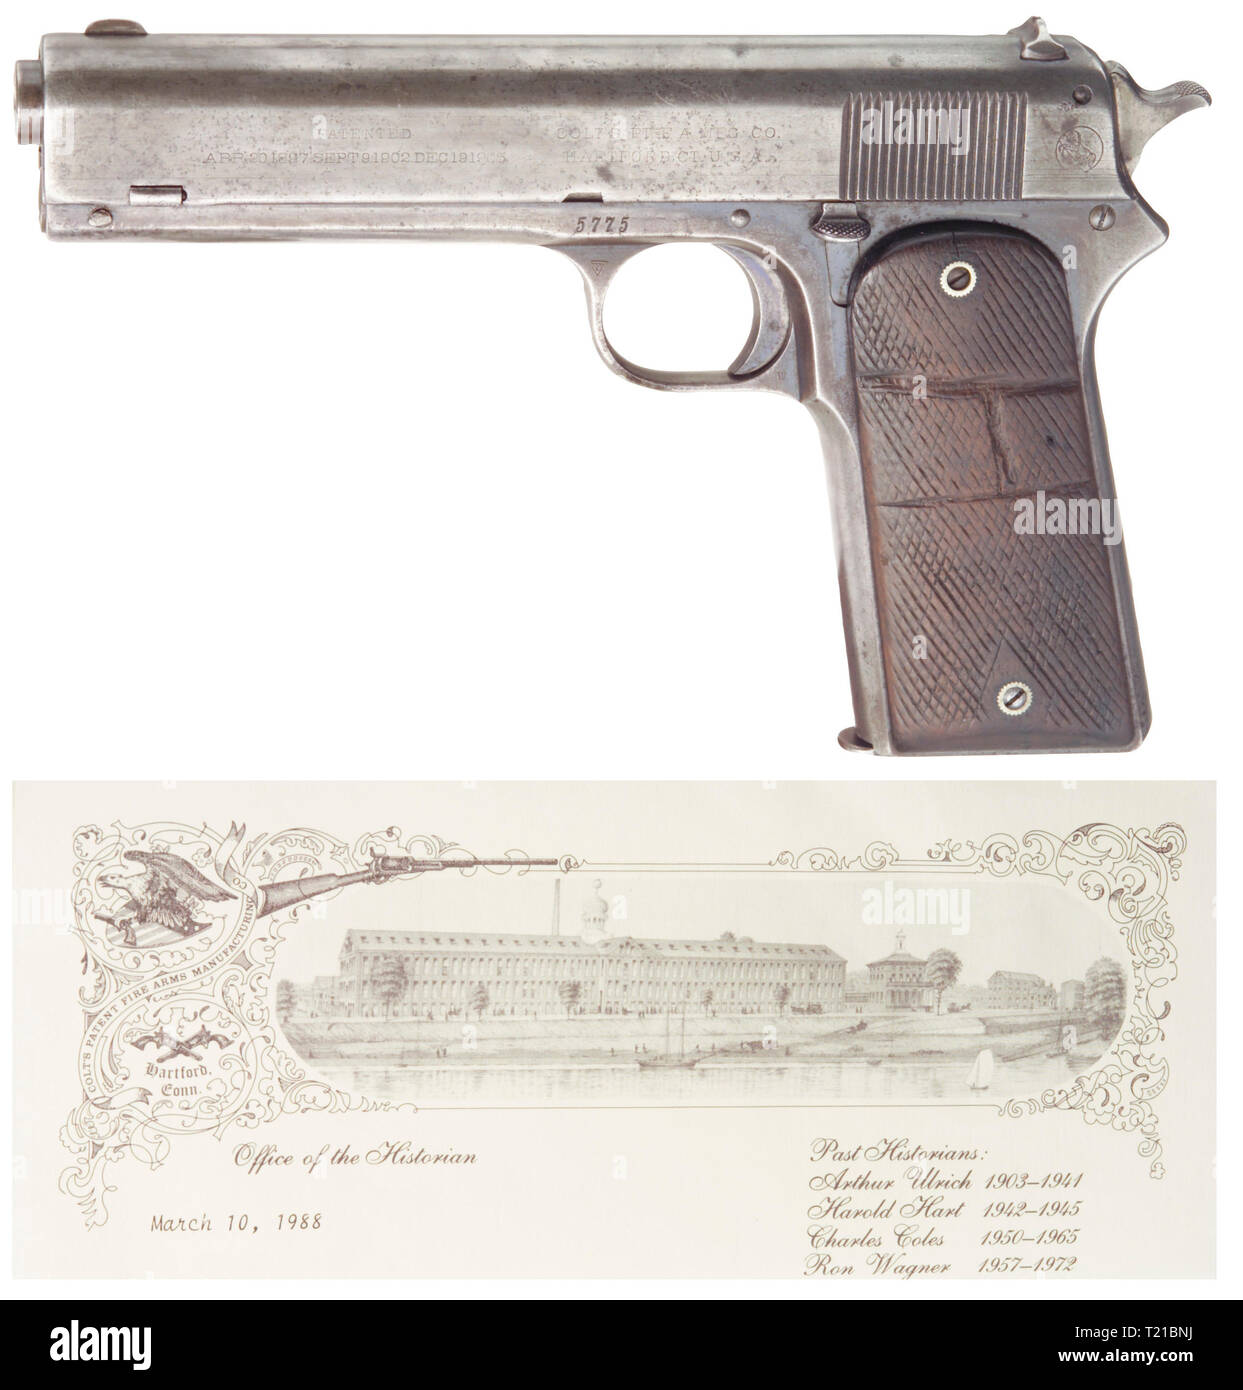 Small arms, pistols, Colt Model 1905, caliber .45, manufactures 1911, Additional-Rights-Clearance-Info-Not-Available Stock Photo